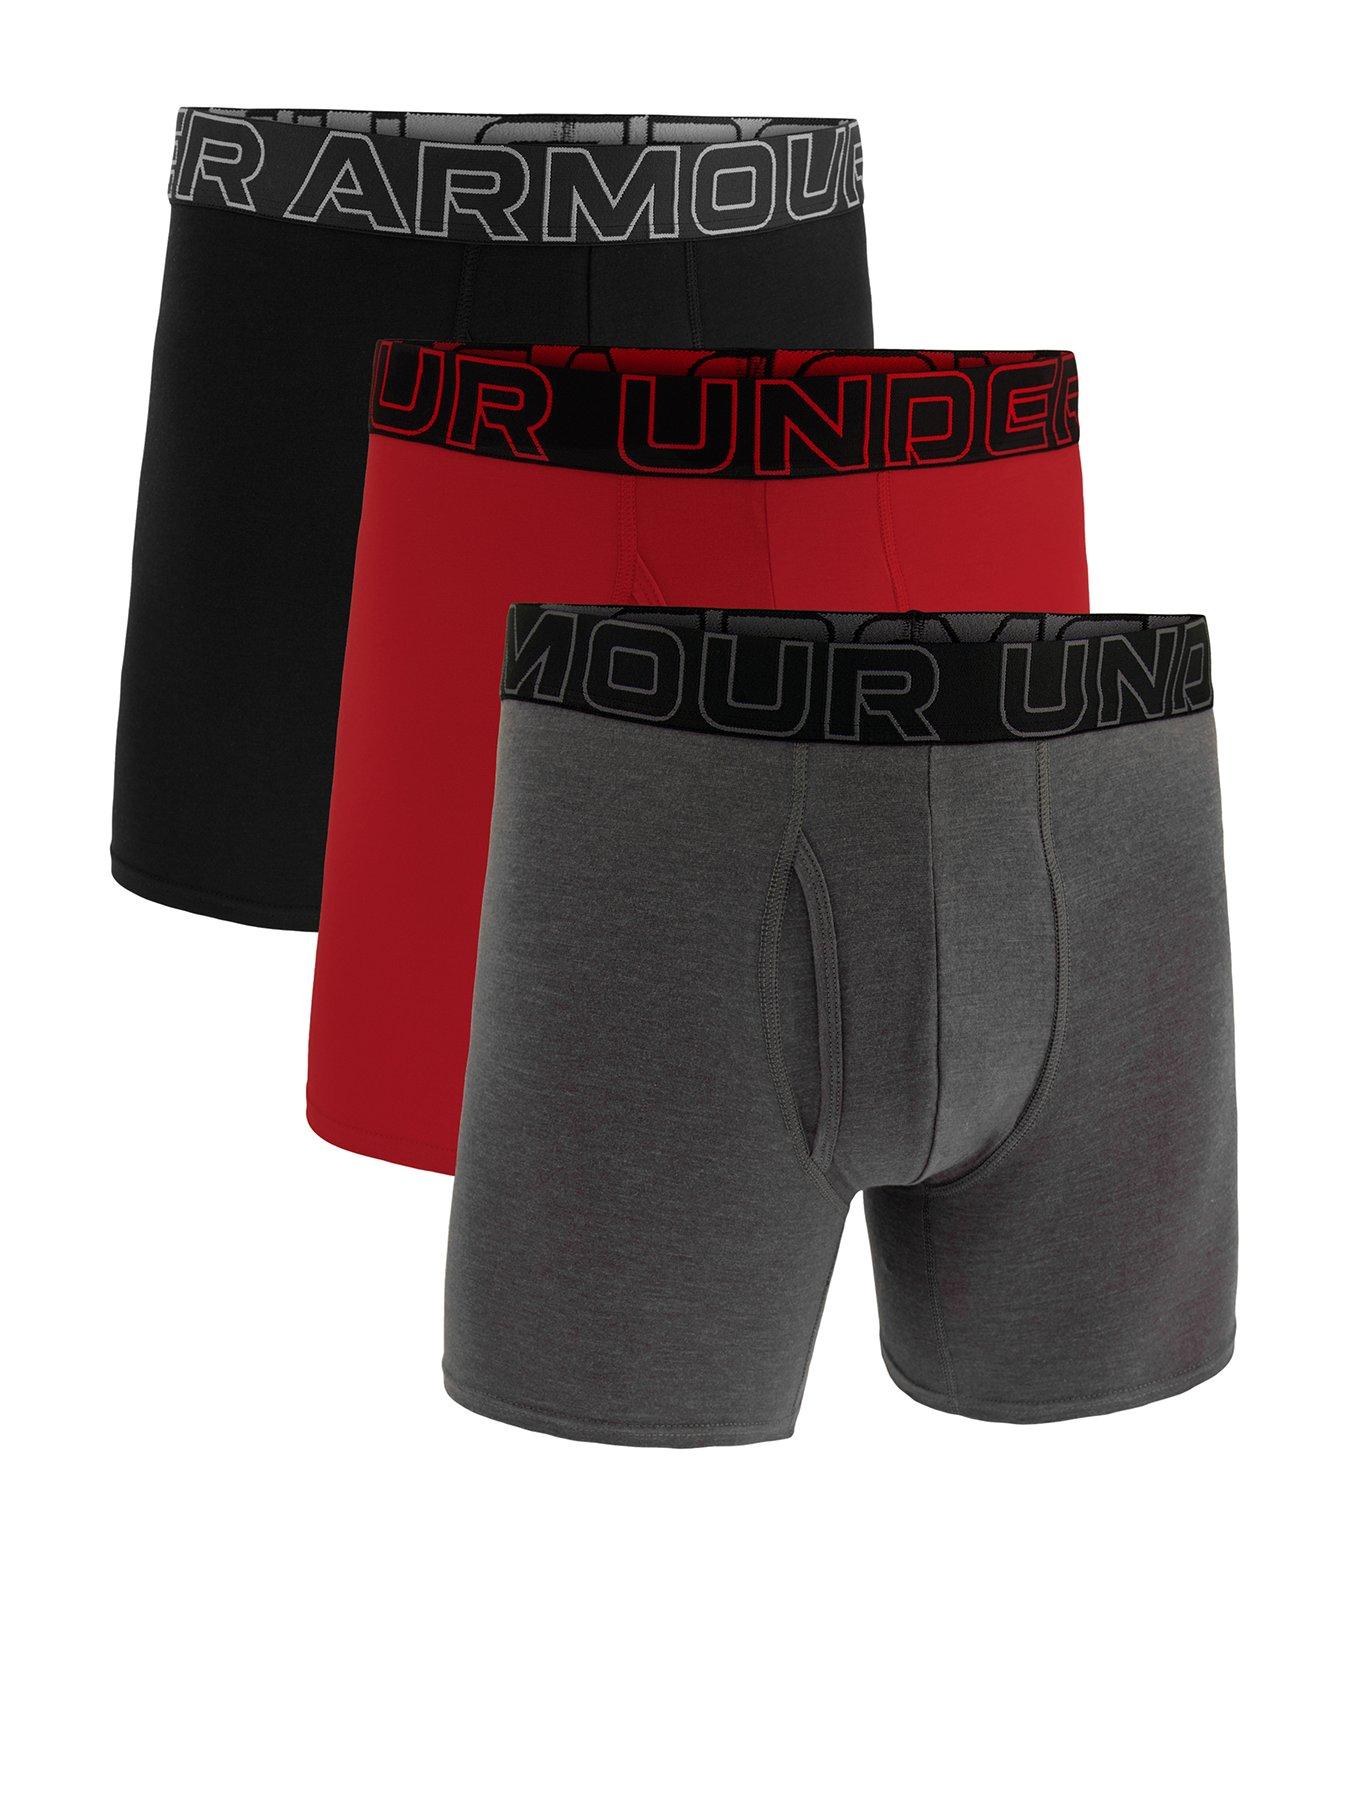 UNDER ARMOUR 3 Pack Men's 6 Inch Performance Cotton Solid Boxers - Black/Red/Grey, Black, Size 2Xl, Men